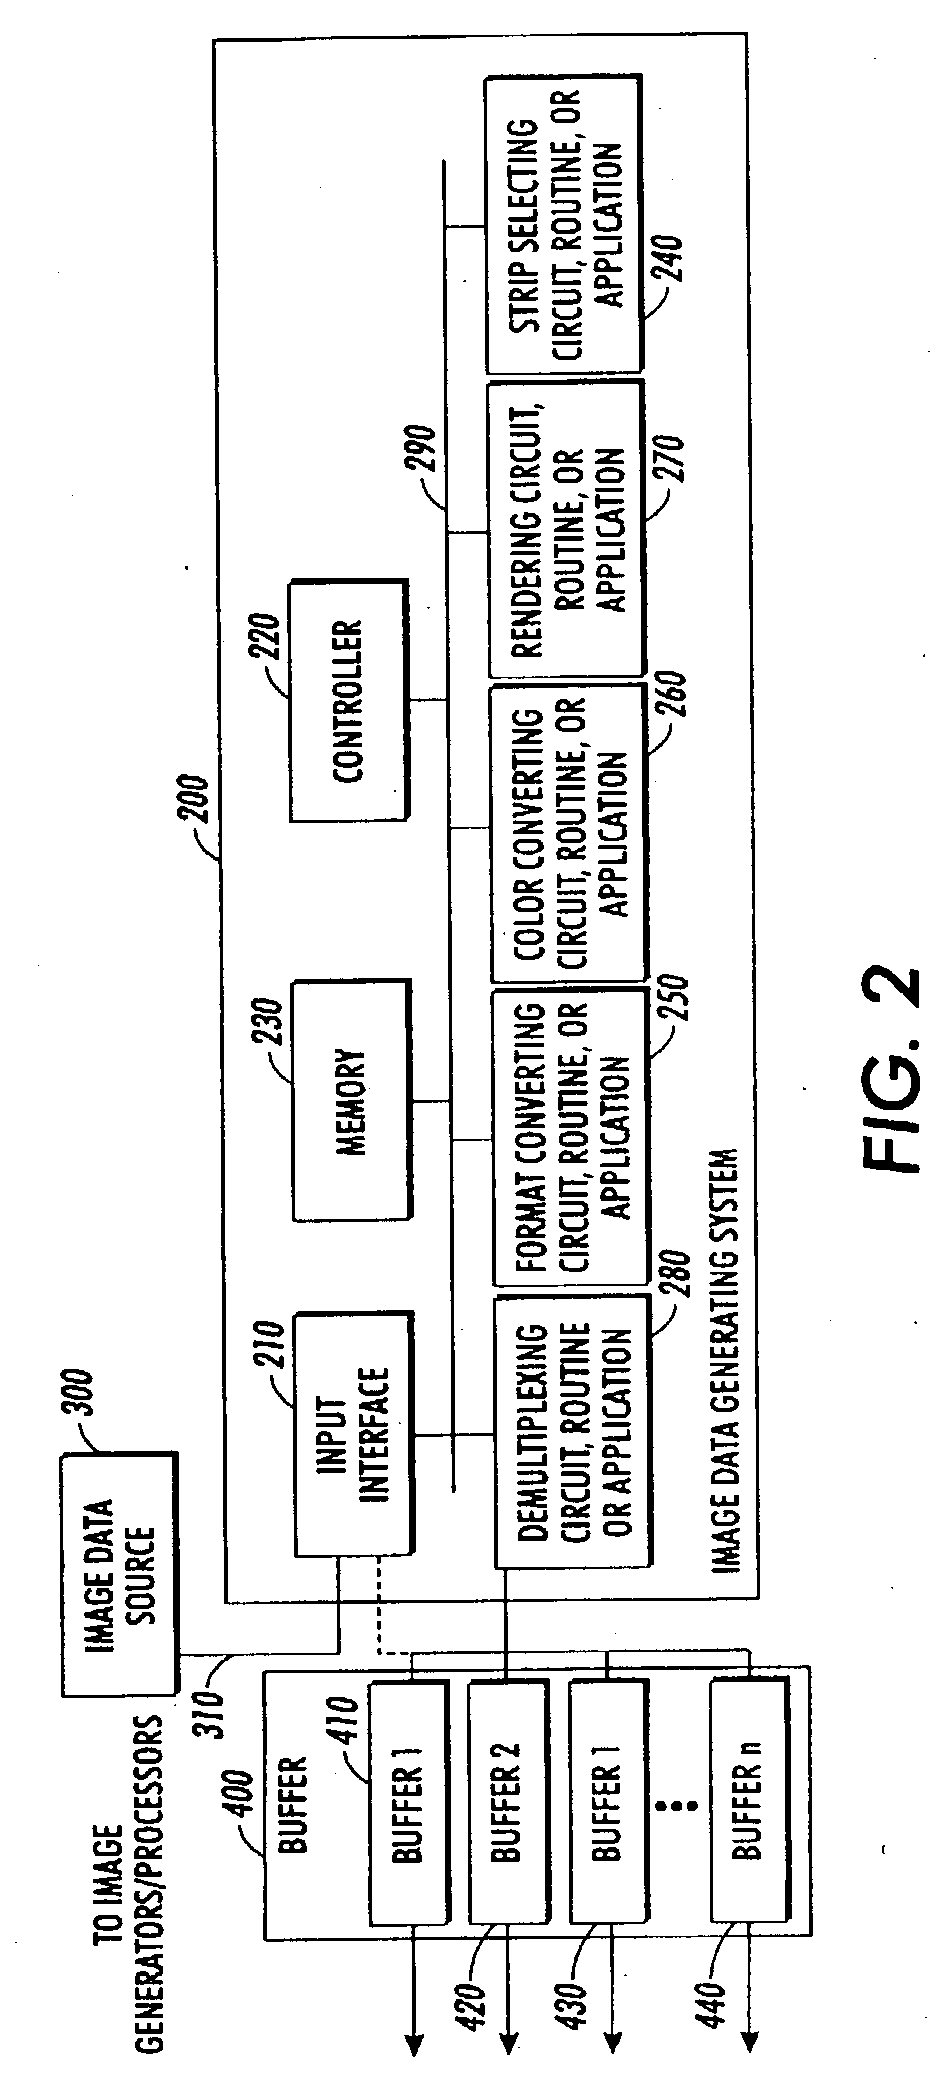 Systems and methods for efficiently generating and supplying image data for tandem printers